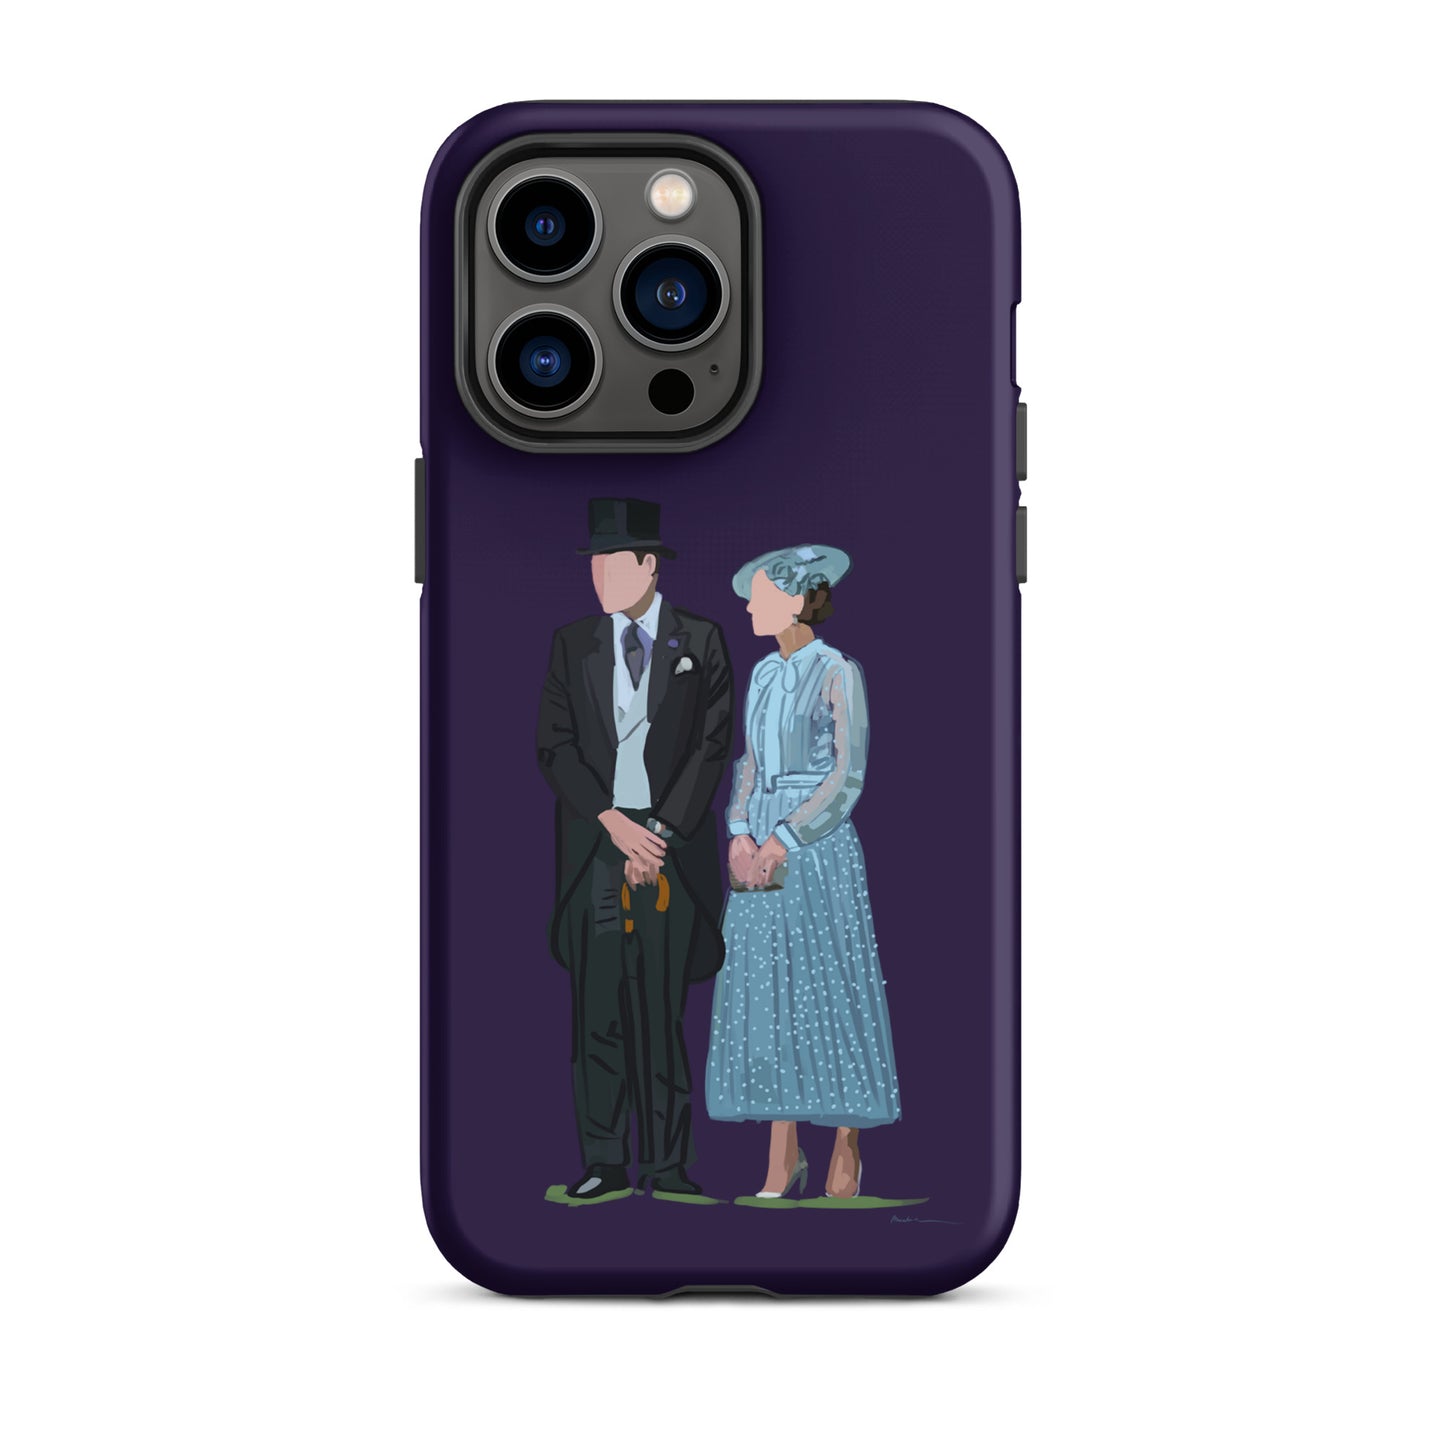 Kate and William Tough iPhone case